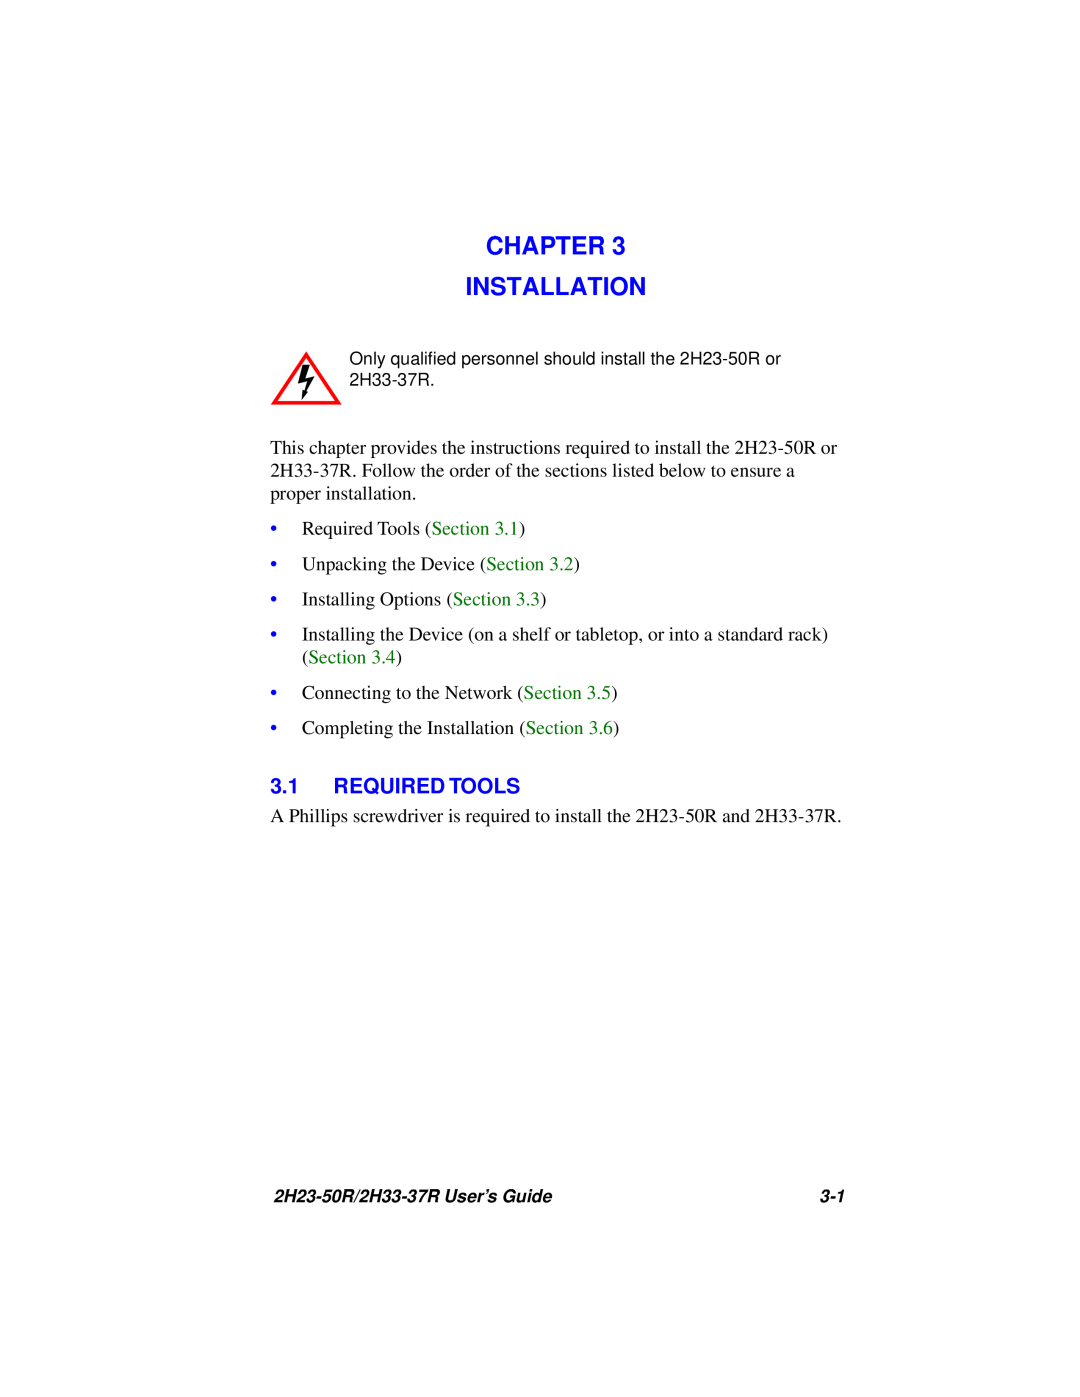 Cabletron Systems 2H23-50R, 2H33-37R manual Chapter Installation, Required Tools 